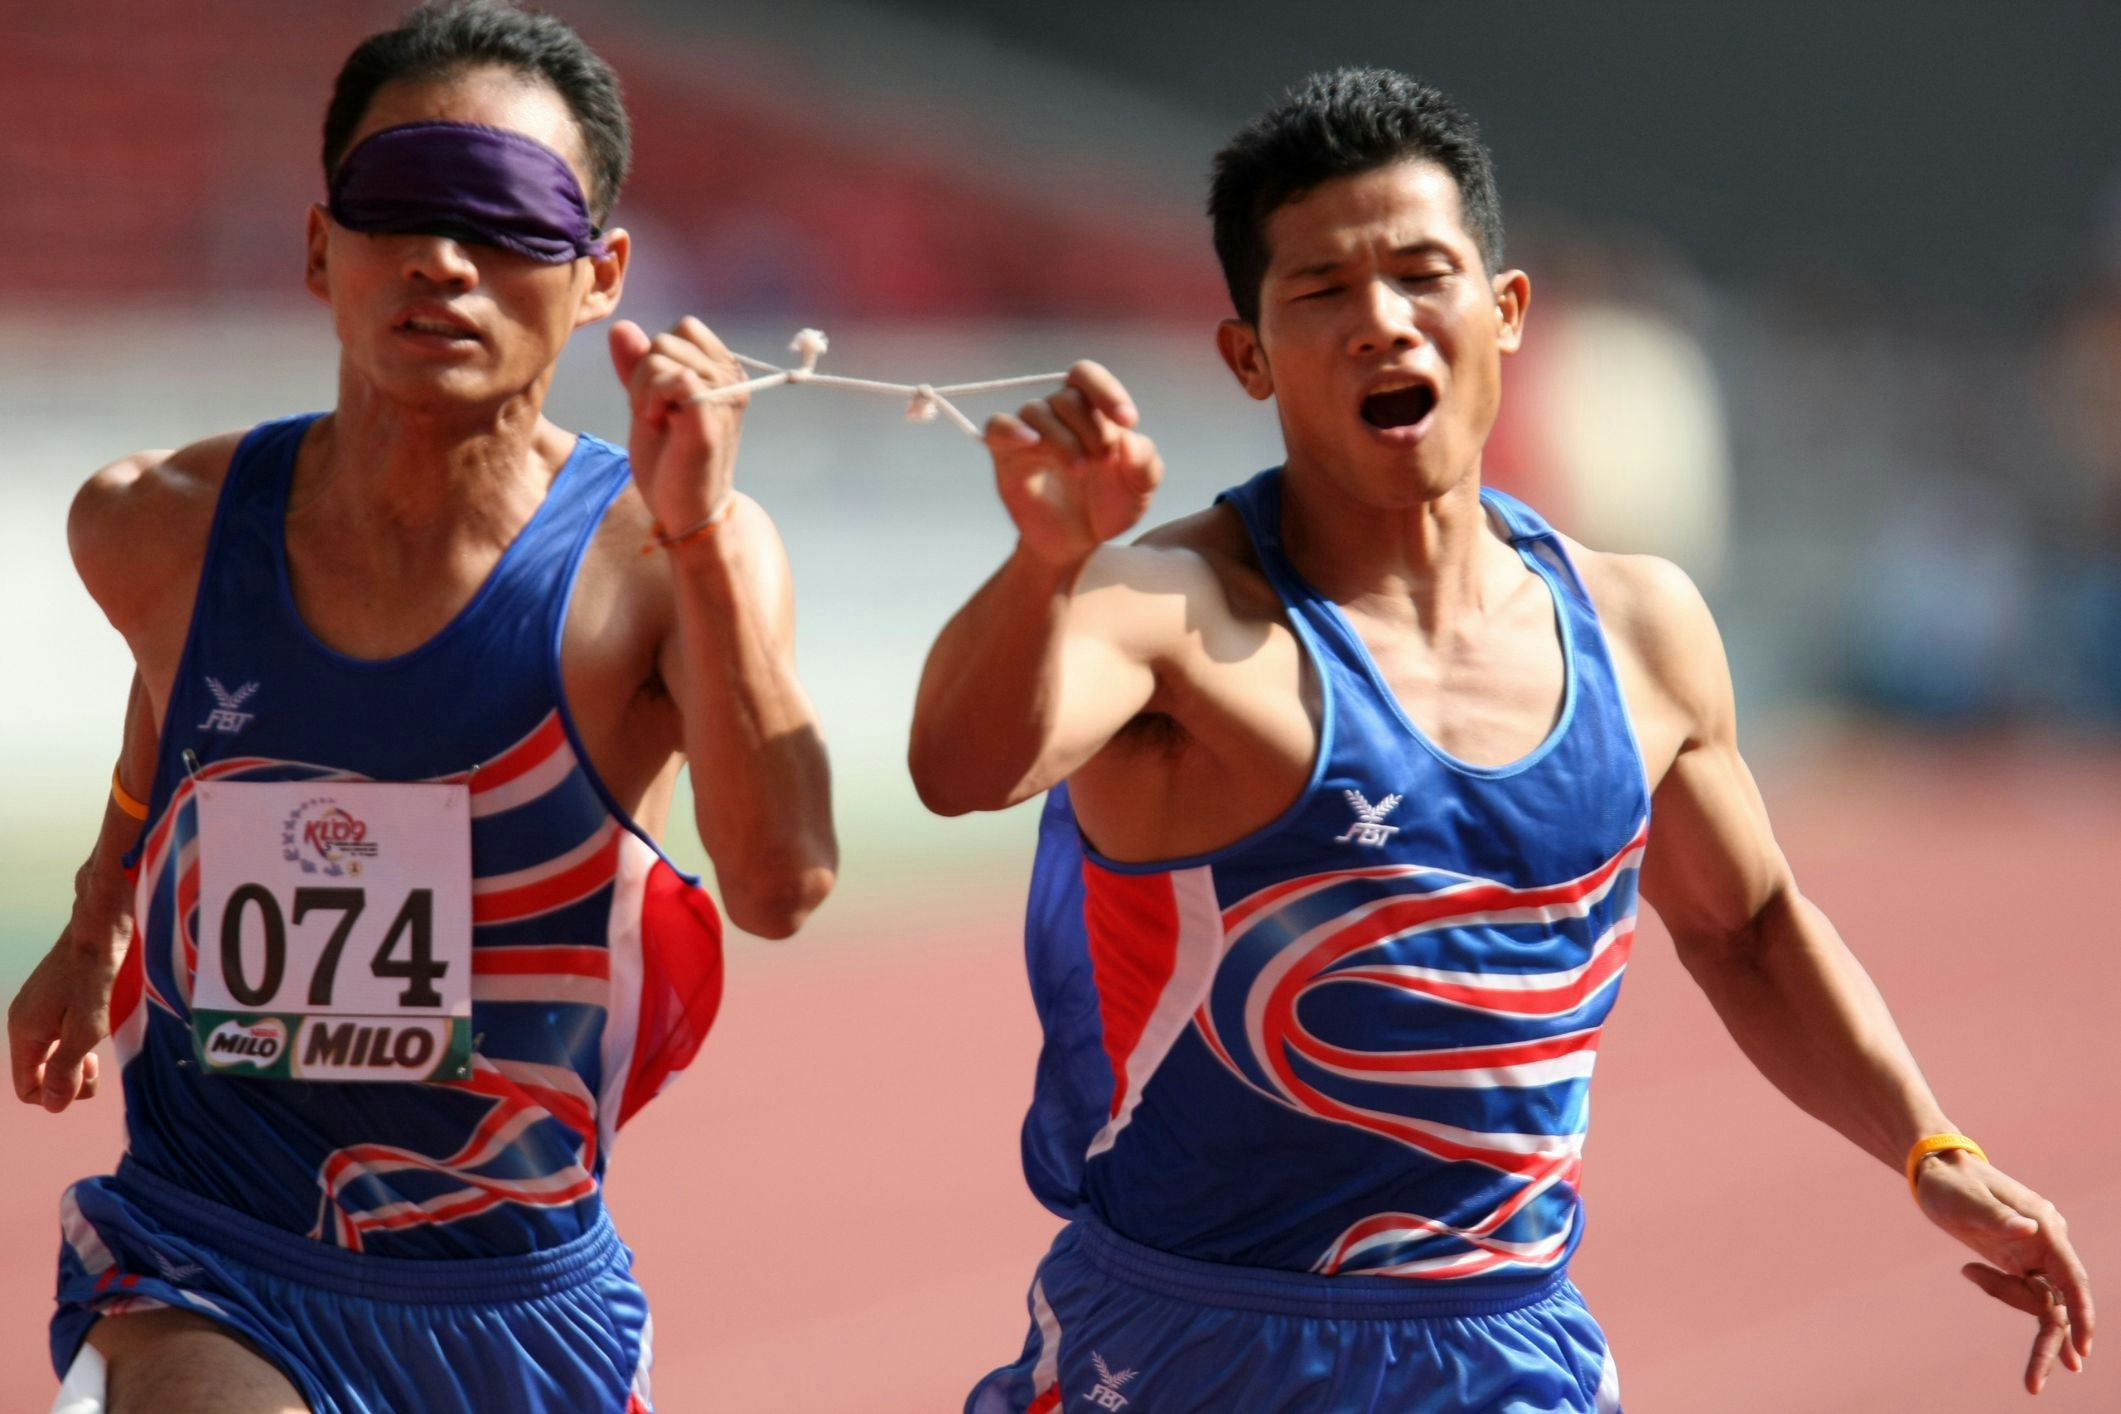 <p>Paralympians living with vision impairment have to keep pace with their guides in an impressive show of camaraderie and determination. [Image courtesy of Chen HW via Shutterstock]</p>
